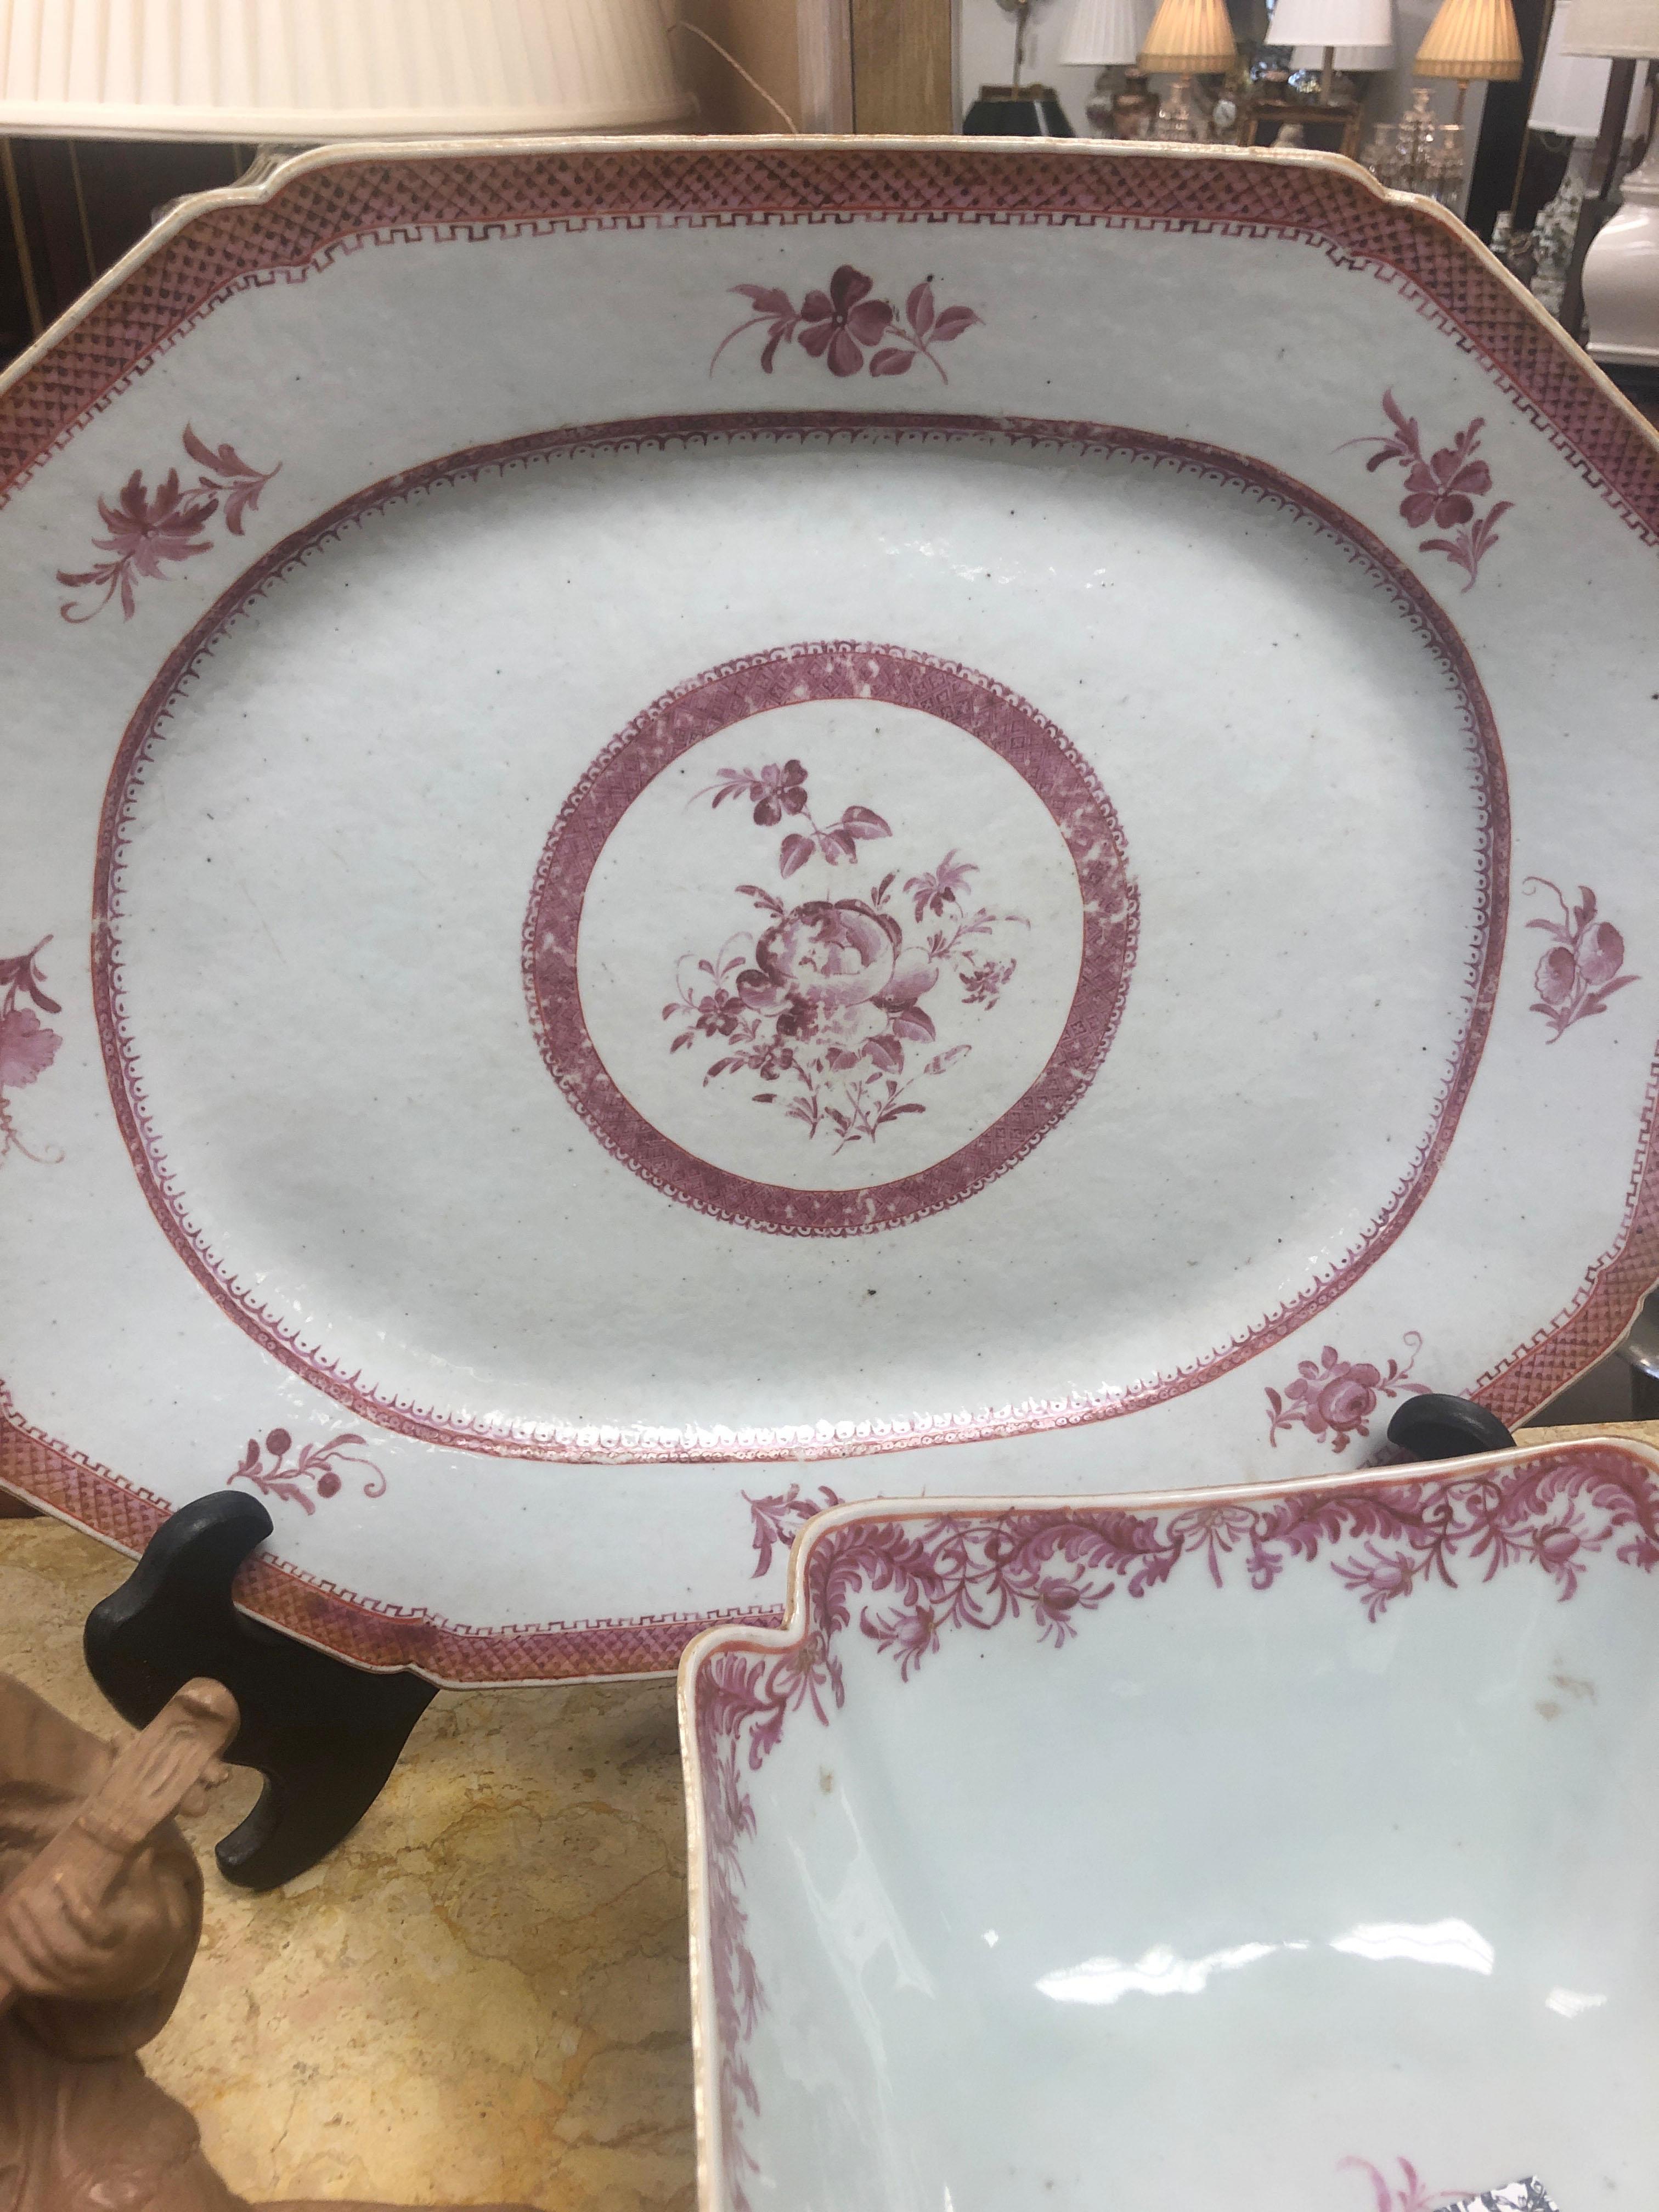 This Chinese export platter Is late 18th century early 19th century in great condition, possibly earlier. The platter has orange peel porcelain glaze and has cut corners.